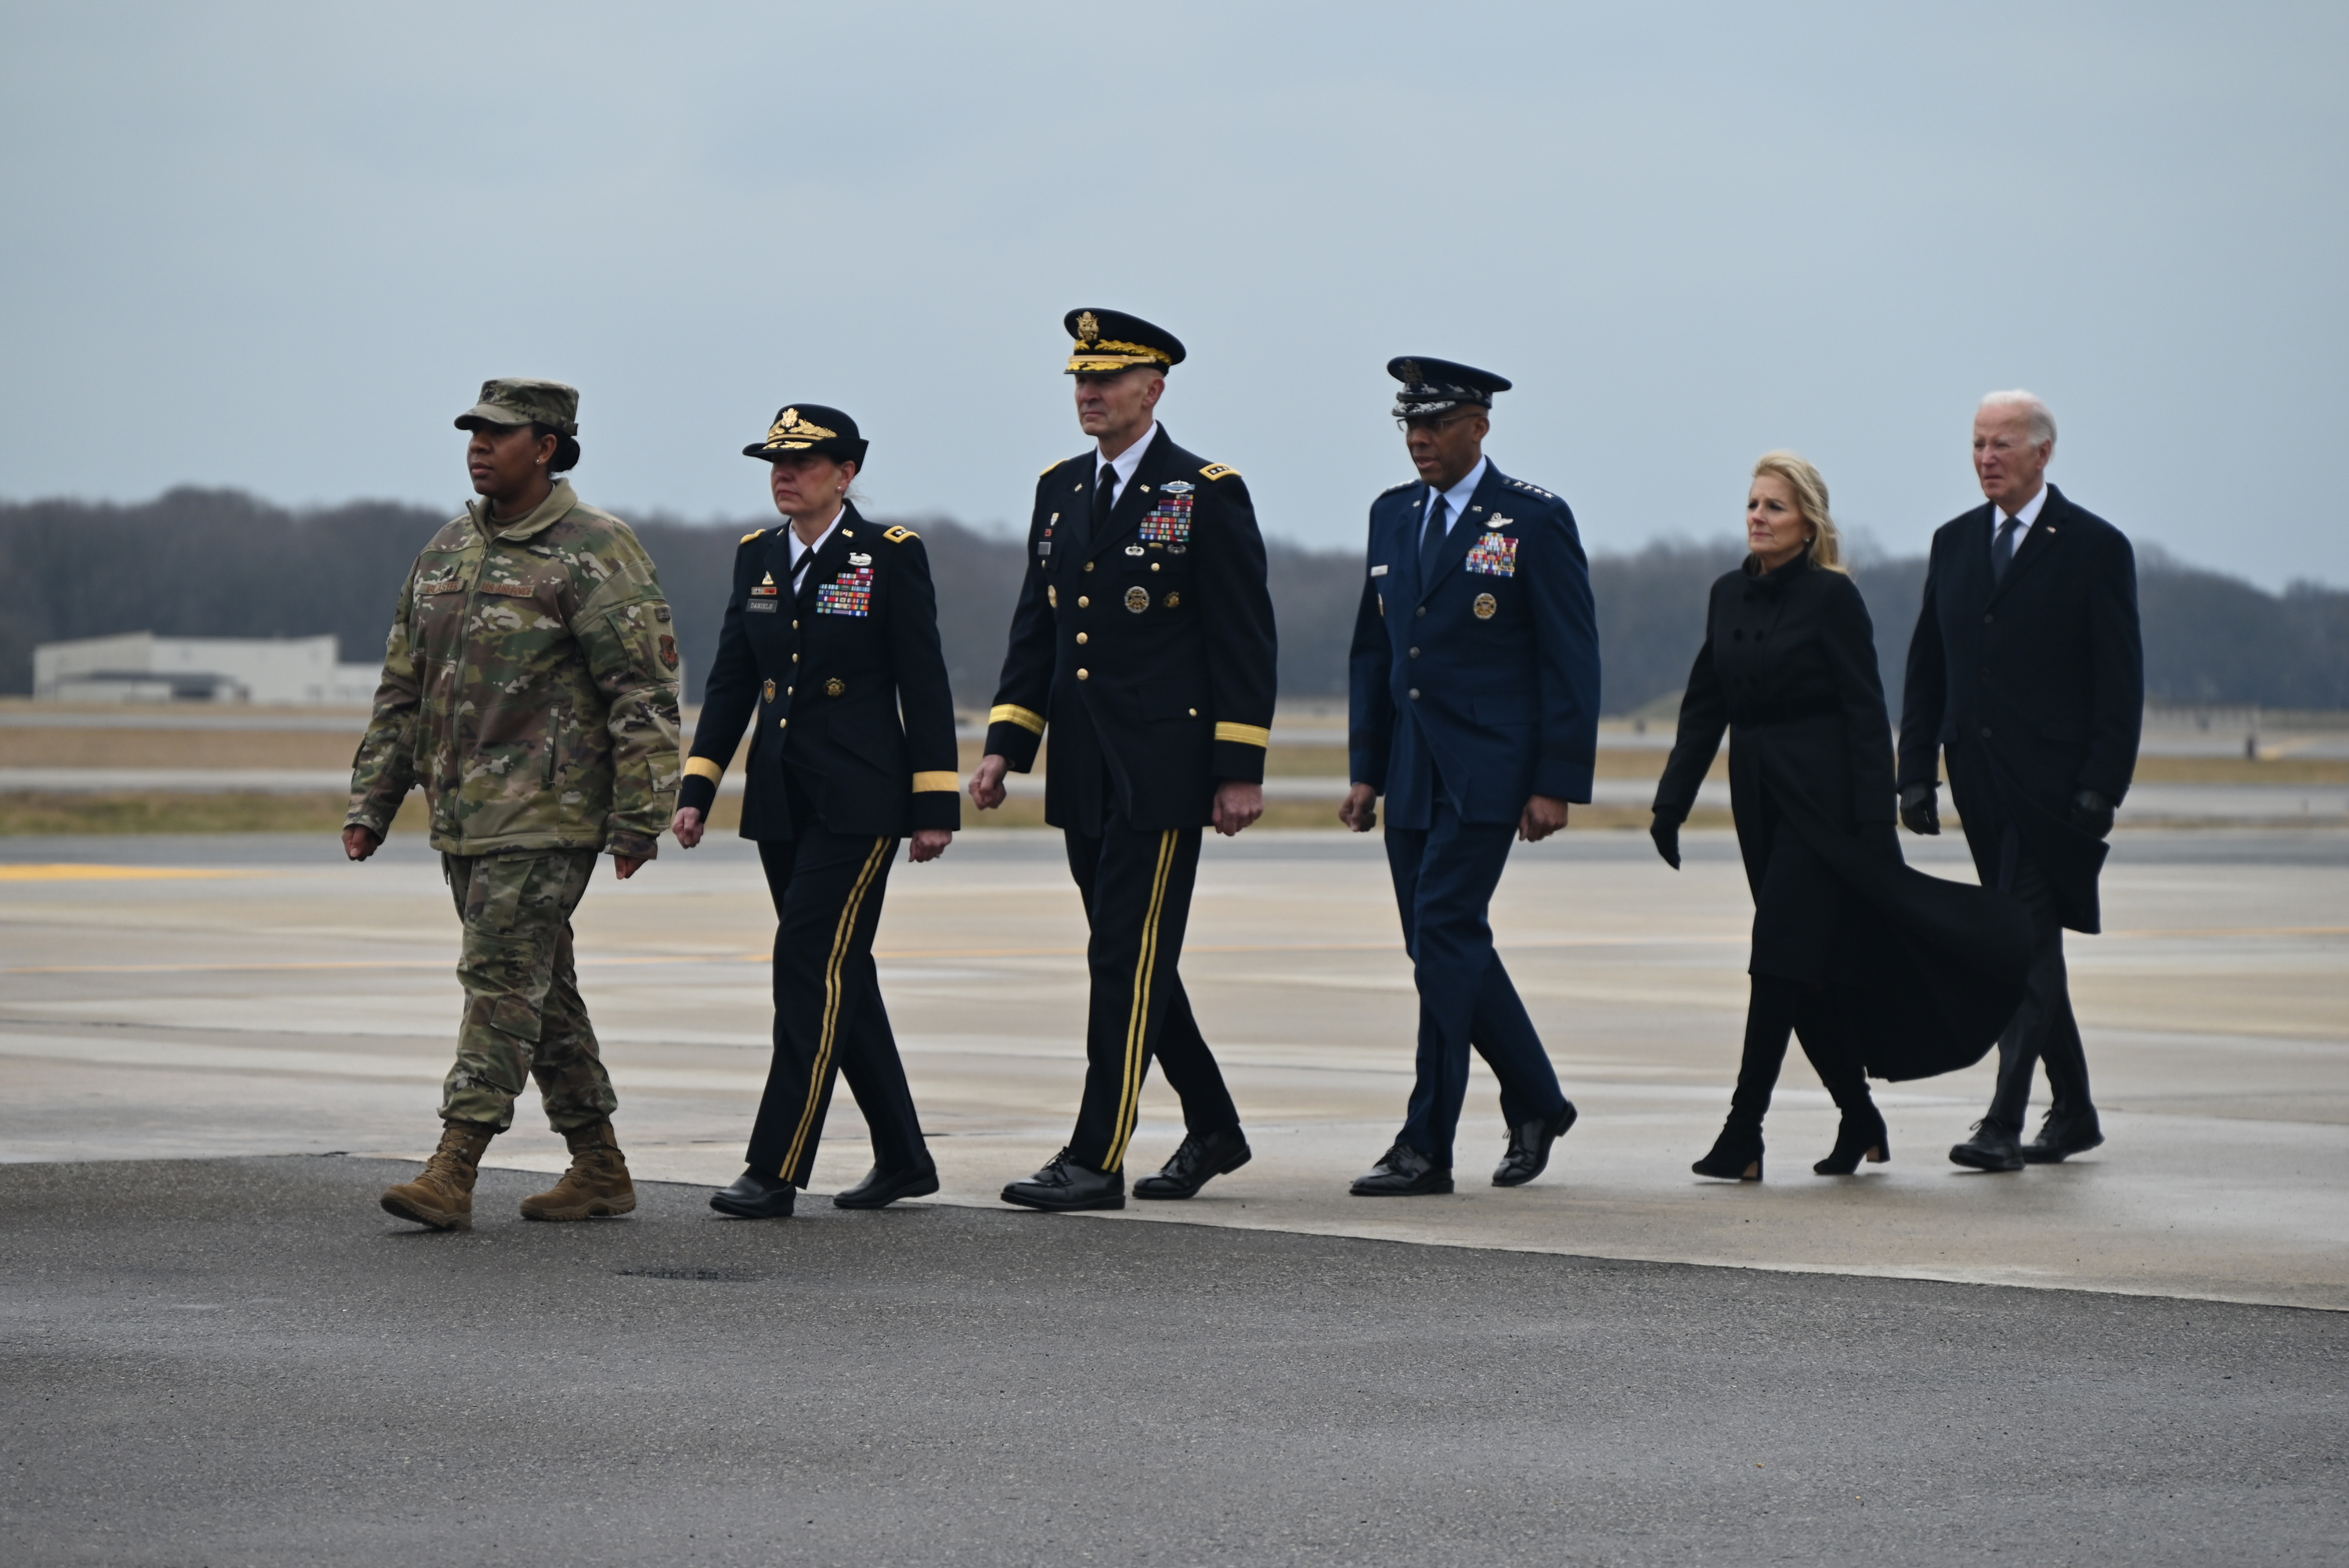 US President Joe Biden, right, and US First Lady Jill Biden, second from right, participate in a dignified transfer of the three soldiers killed in a drone attack in Jordan, at Dover Air Force Base in Dover, Delaware on February 2.